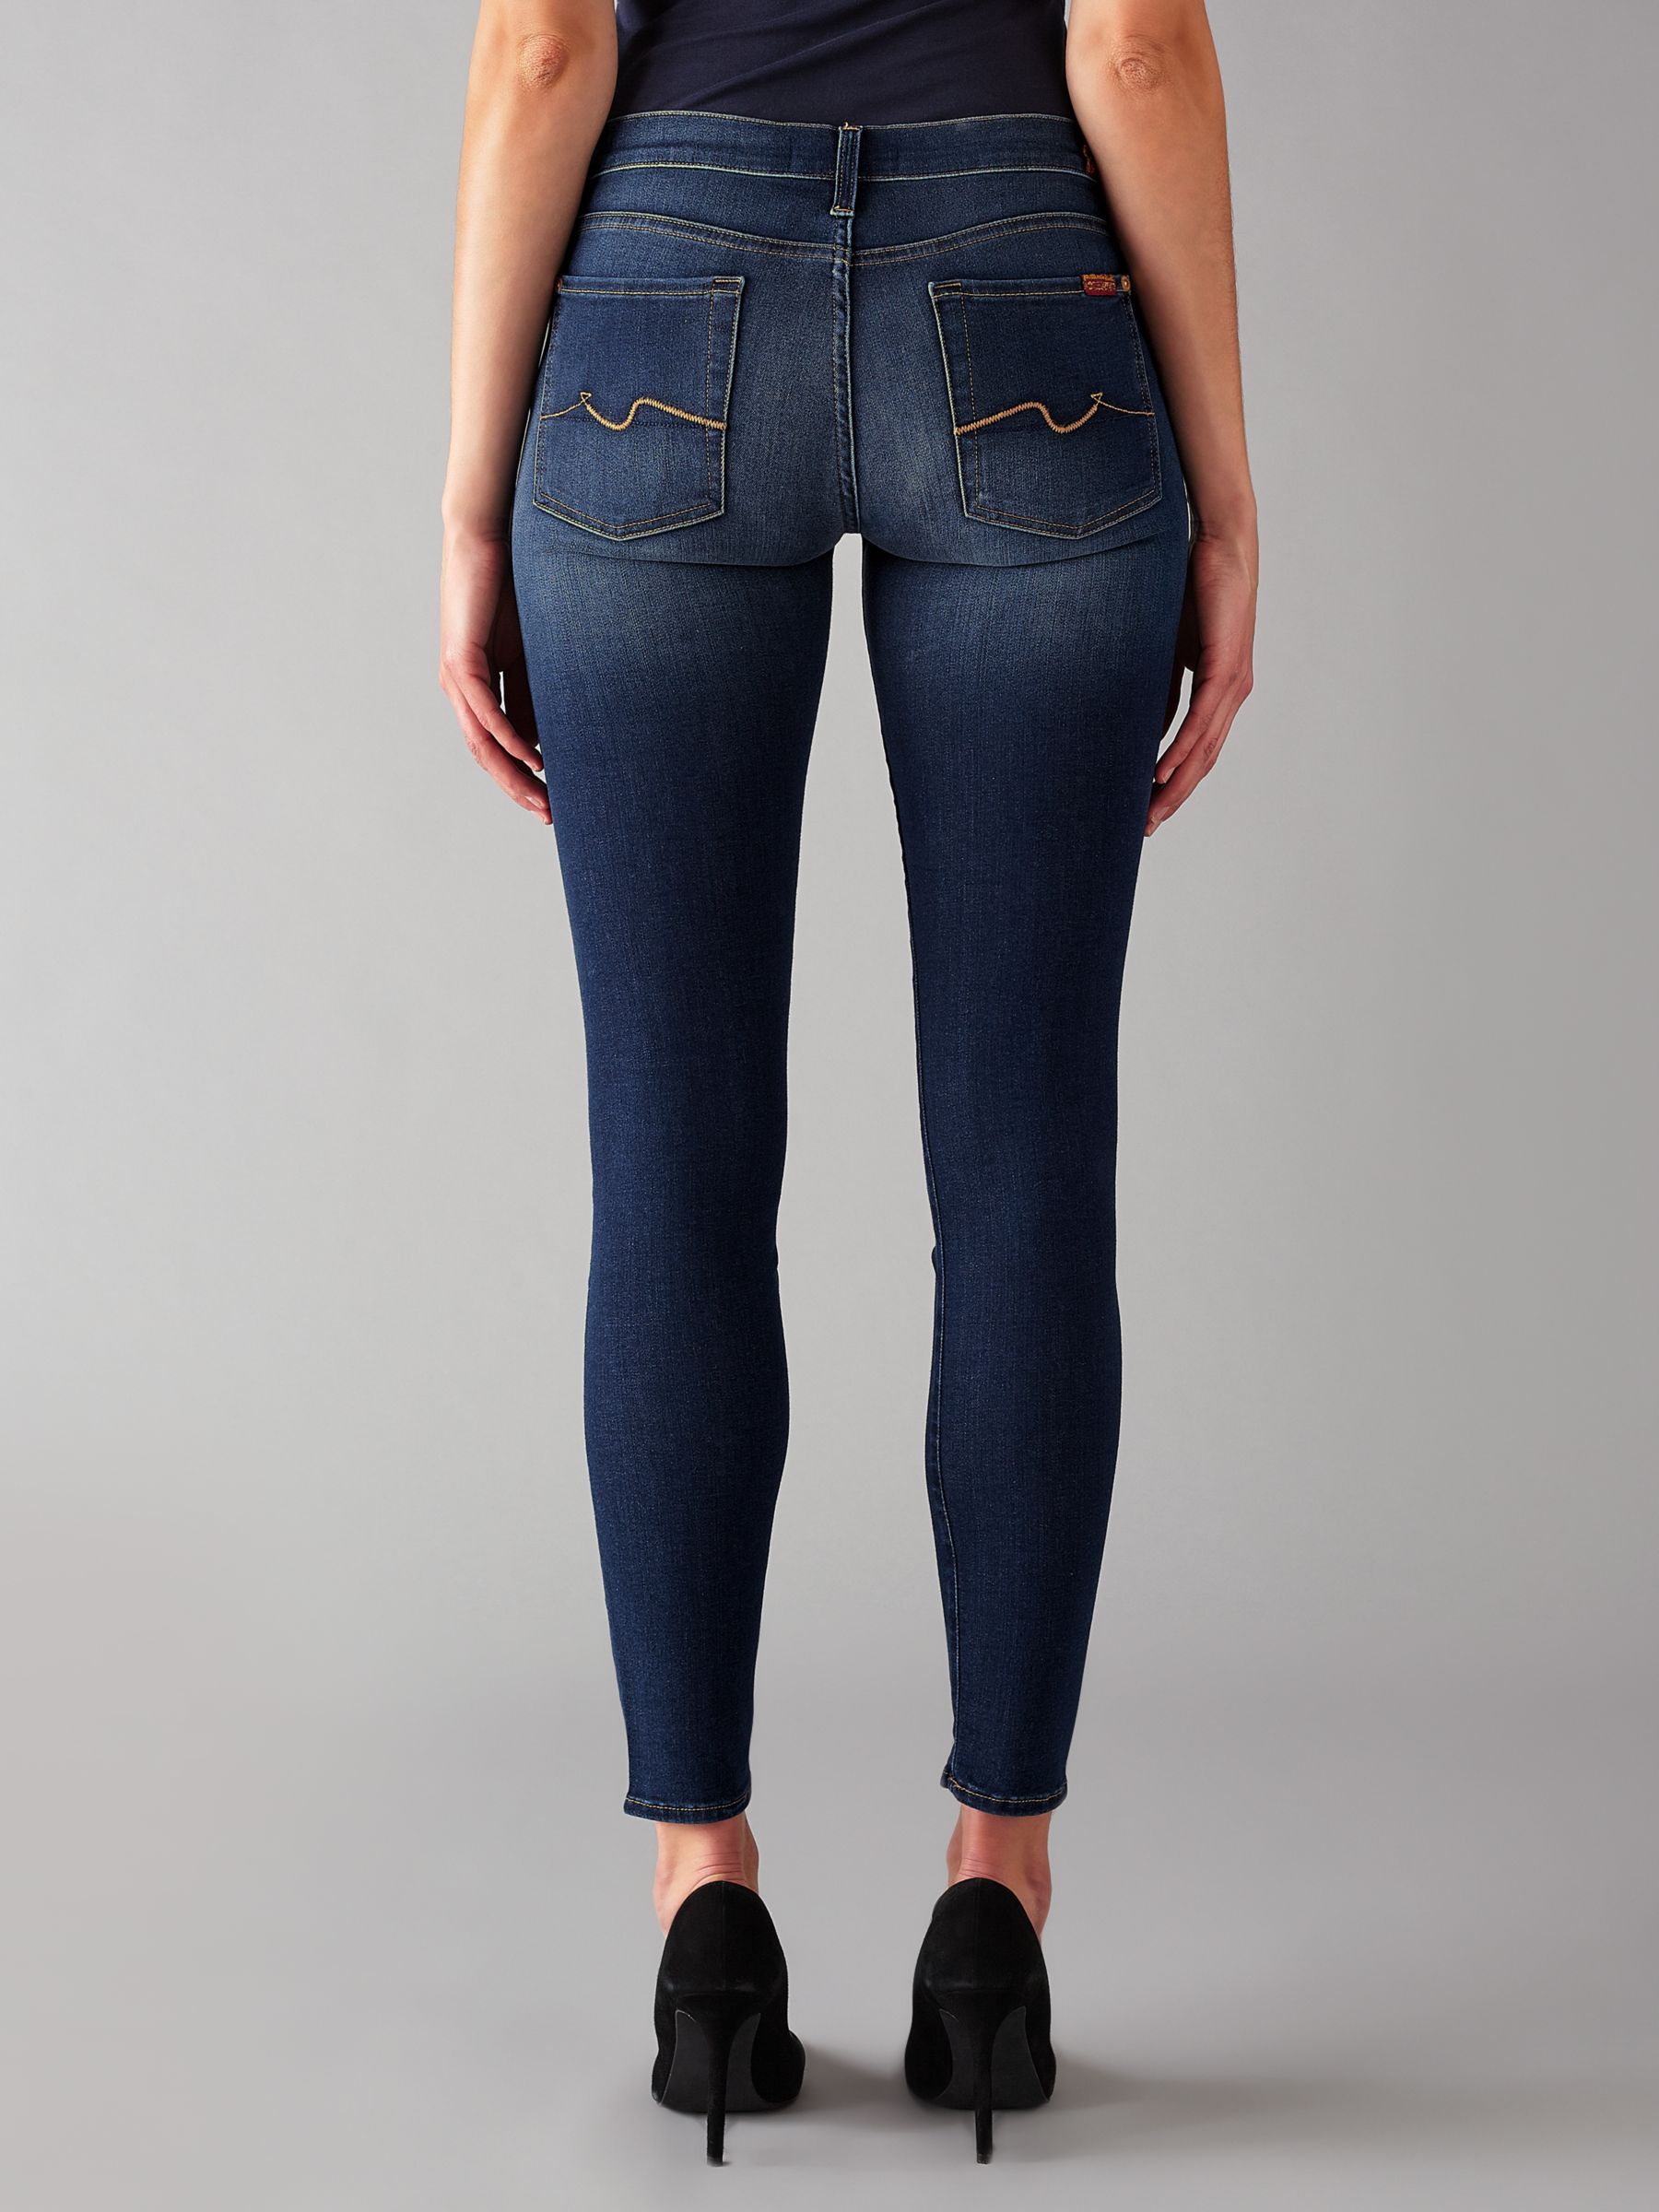 7 For All Mankind The Skinny B(air) Jeans, Duchess at John Lewis & Partners